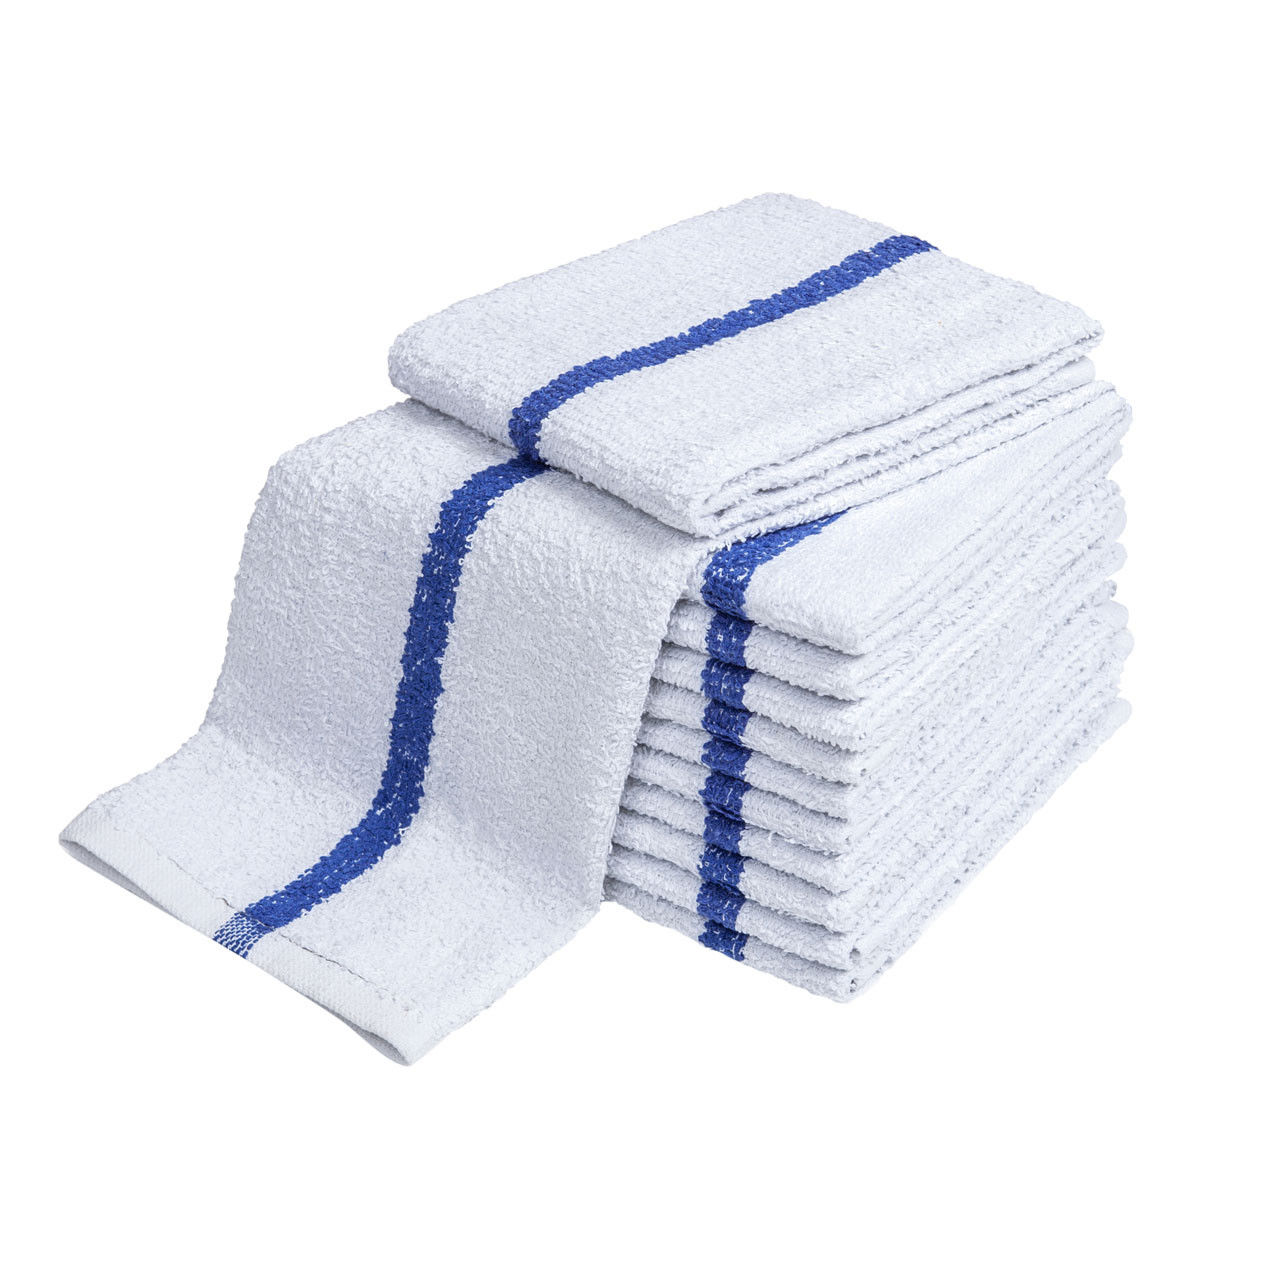 What is the difference between a bar towel and a kitchen towel?